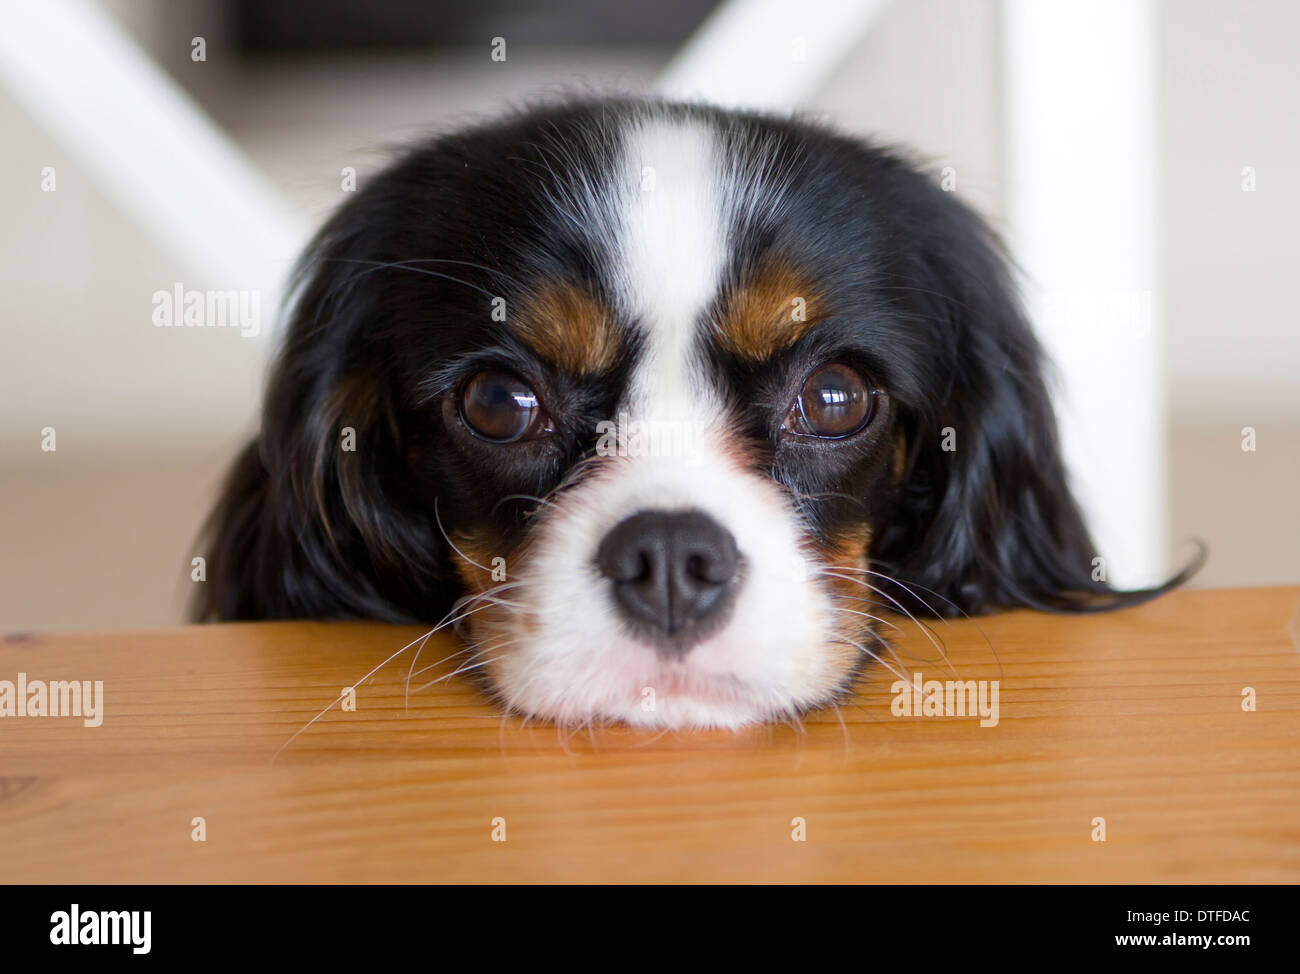 cute dog begging for food at the kitchen table Stock Photo